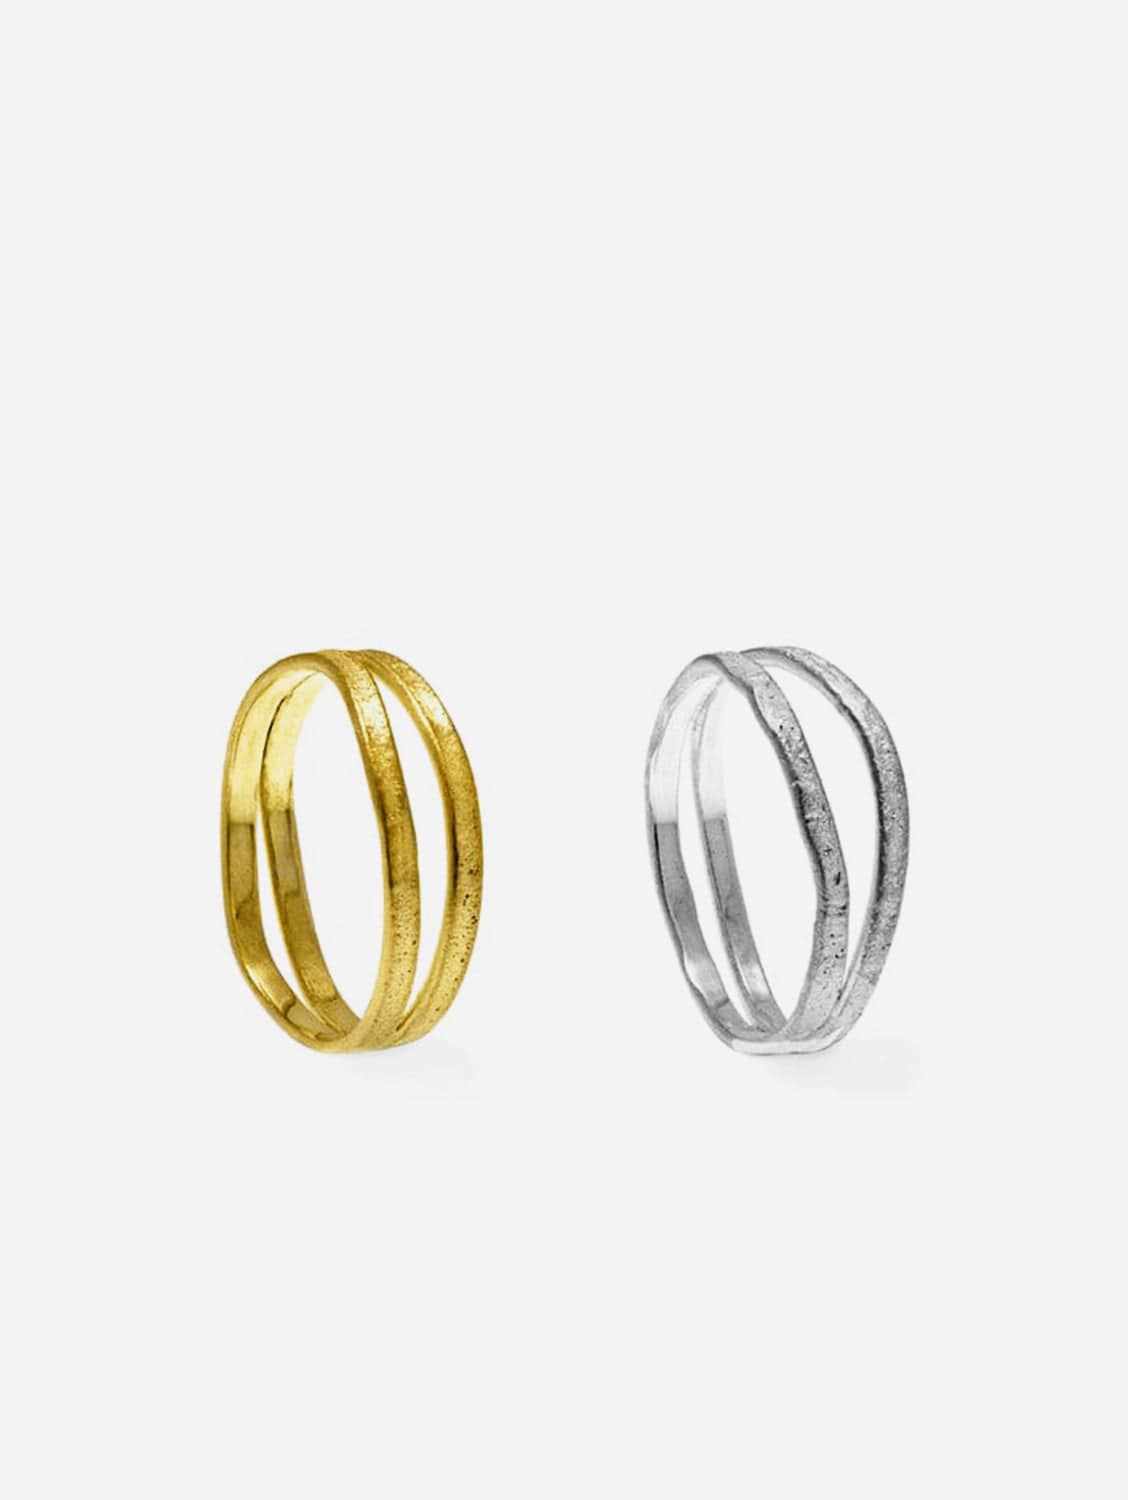 JULIA THOMPSON JEWELLERY Silver / Fairtrade Gold Double Nest Rings